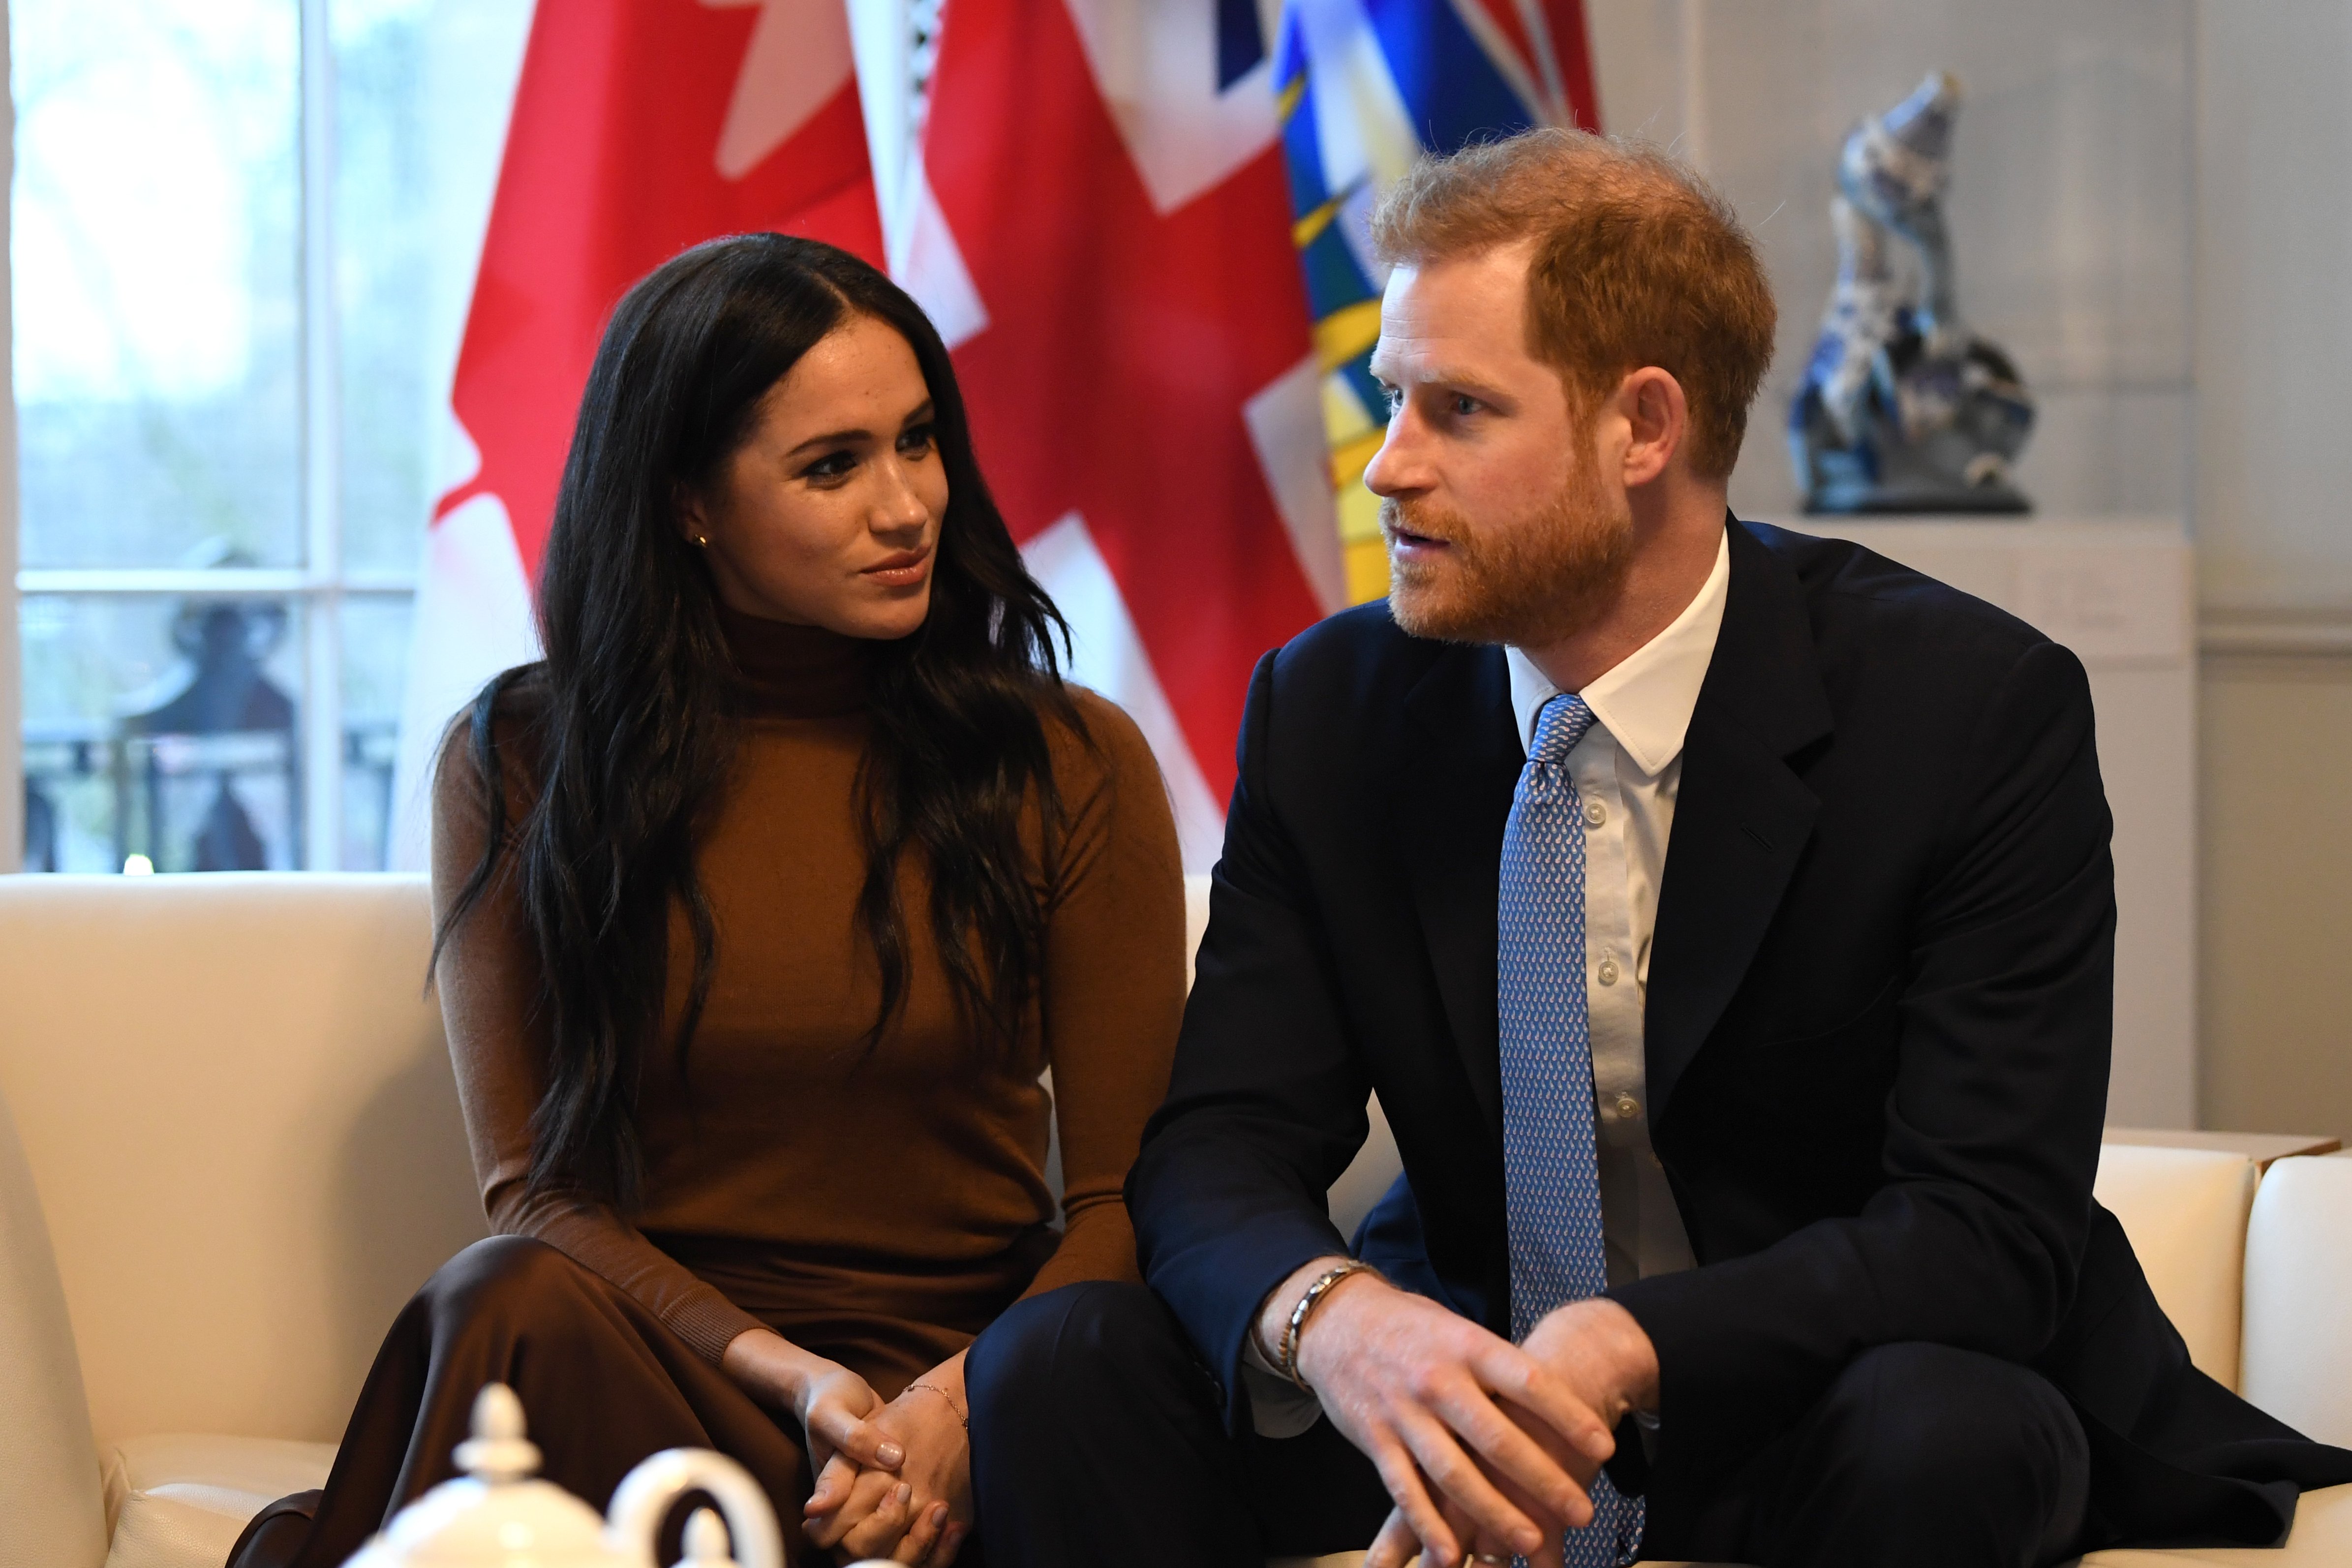 Prince Harry and Meghan Markle during their visit to Canada House on January 7, 2020 | Source: Getty Images.